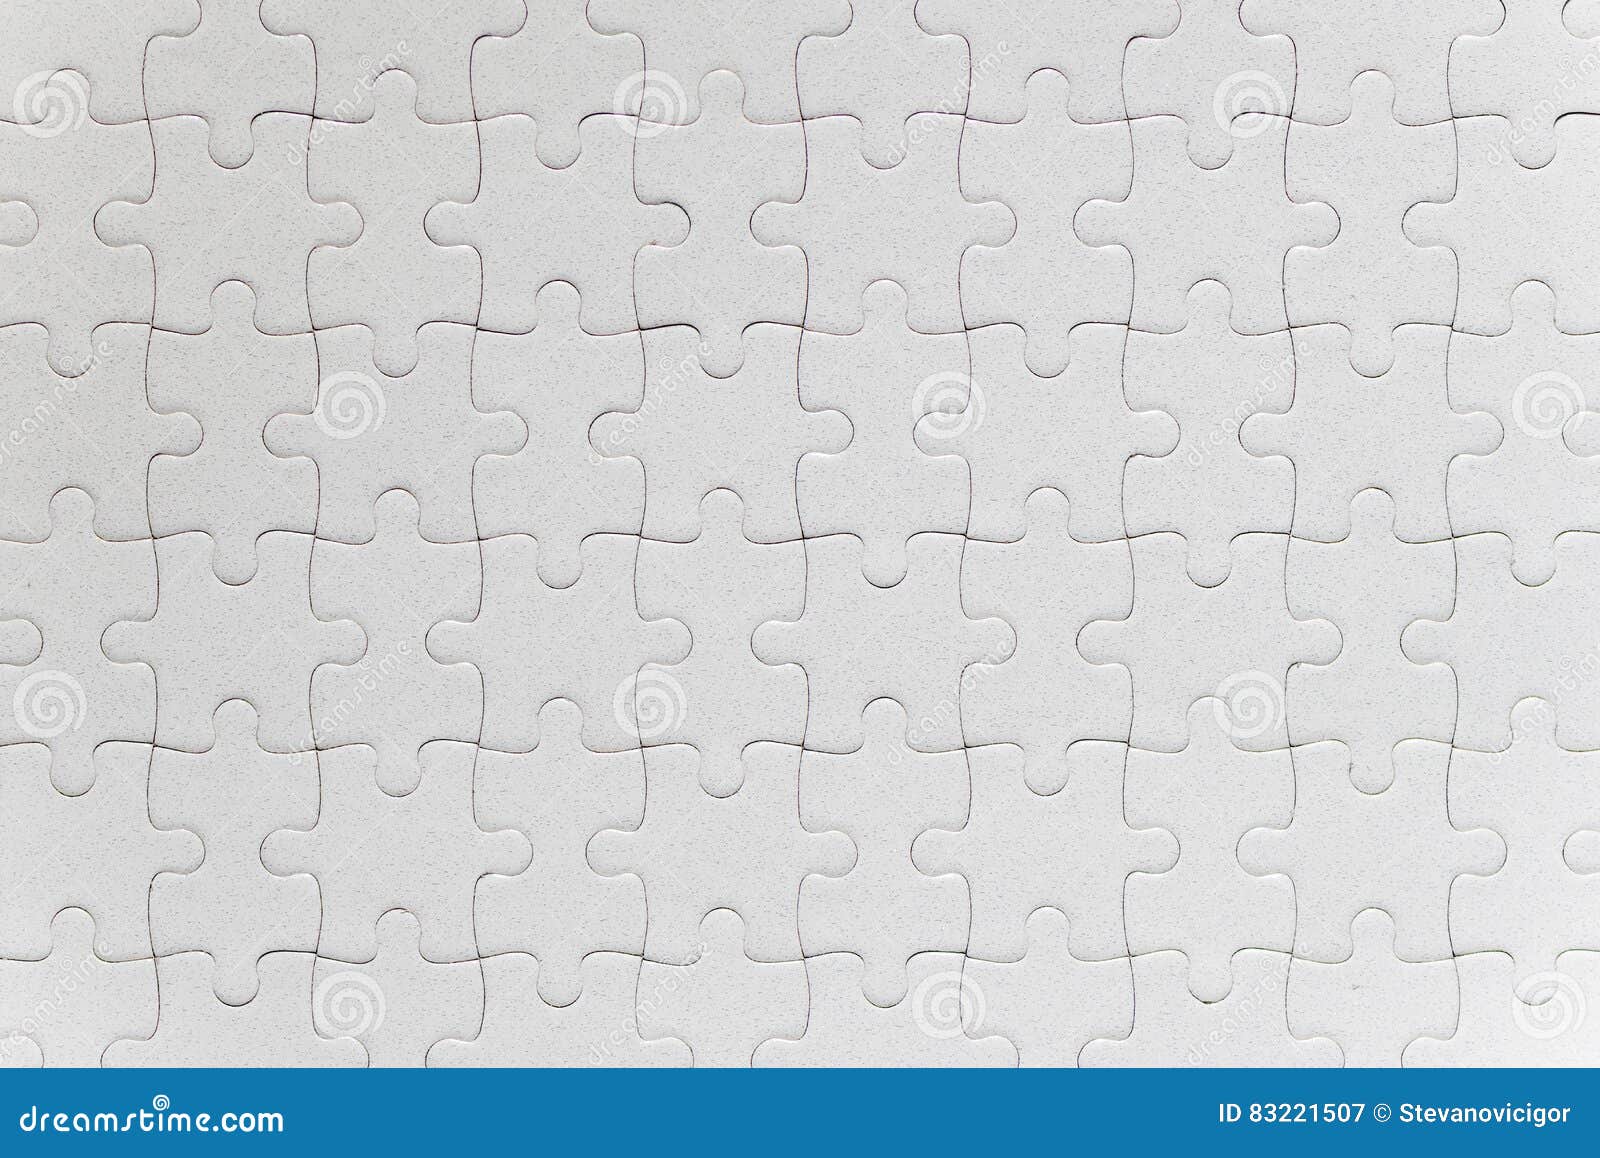 blank white jigsaw puzzle pieces completed